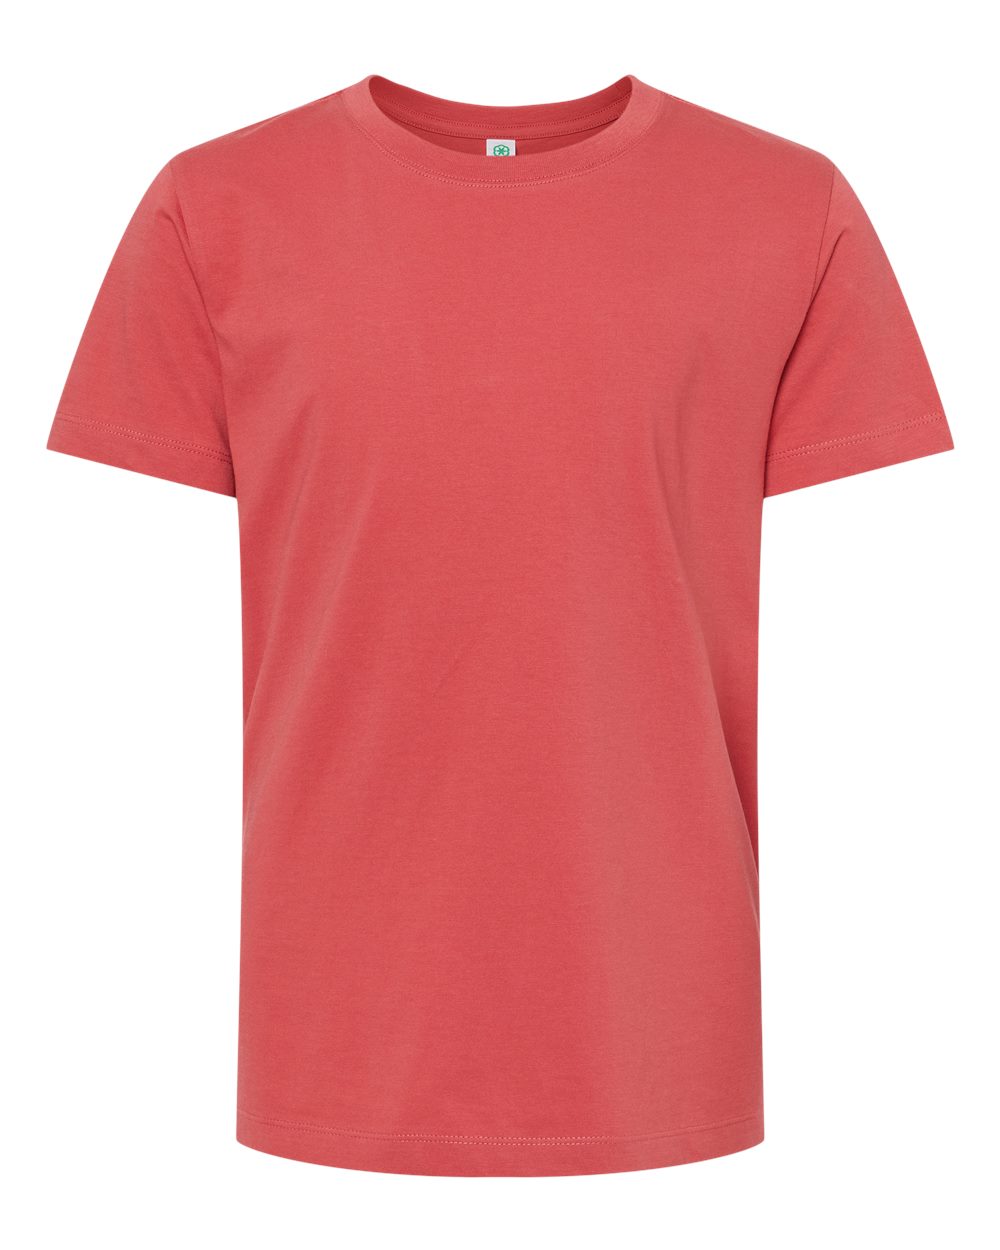 Softshirts® Youth Organic Cotton T-shirt in red